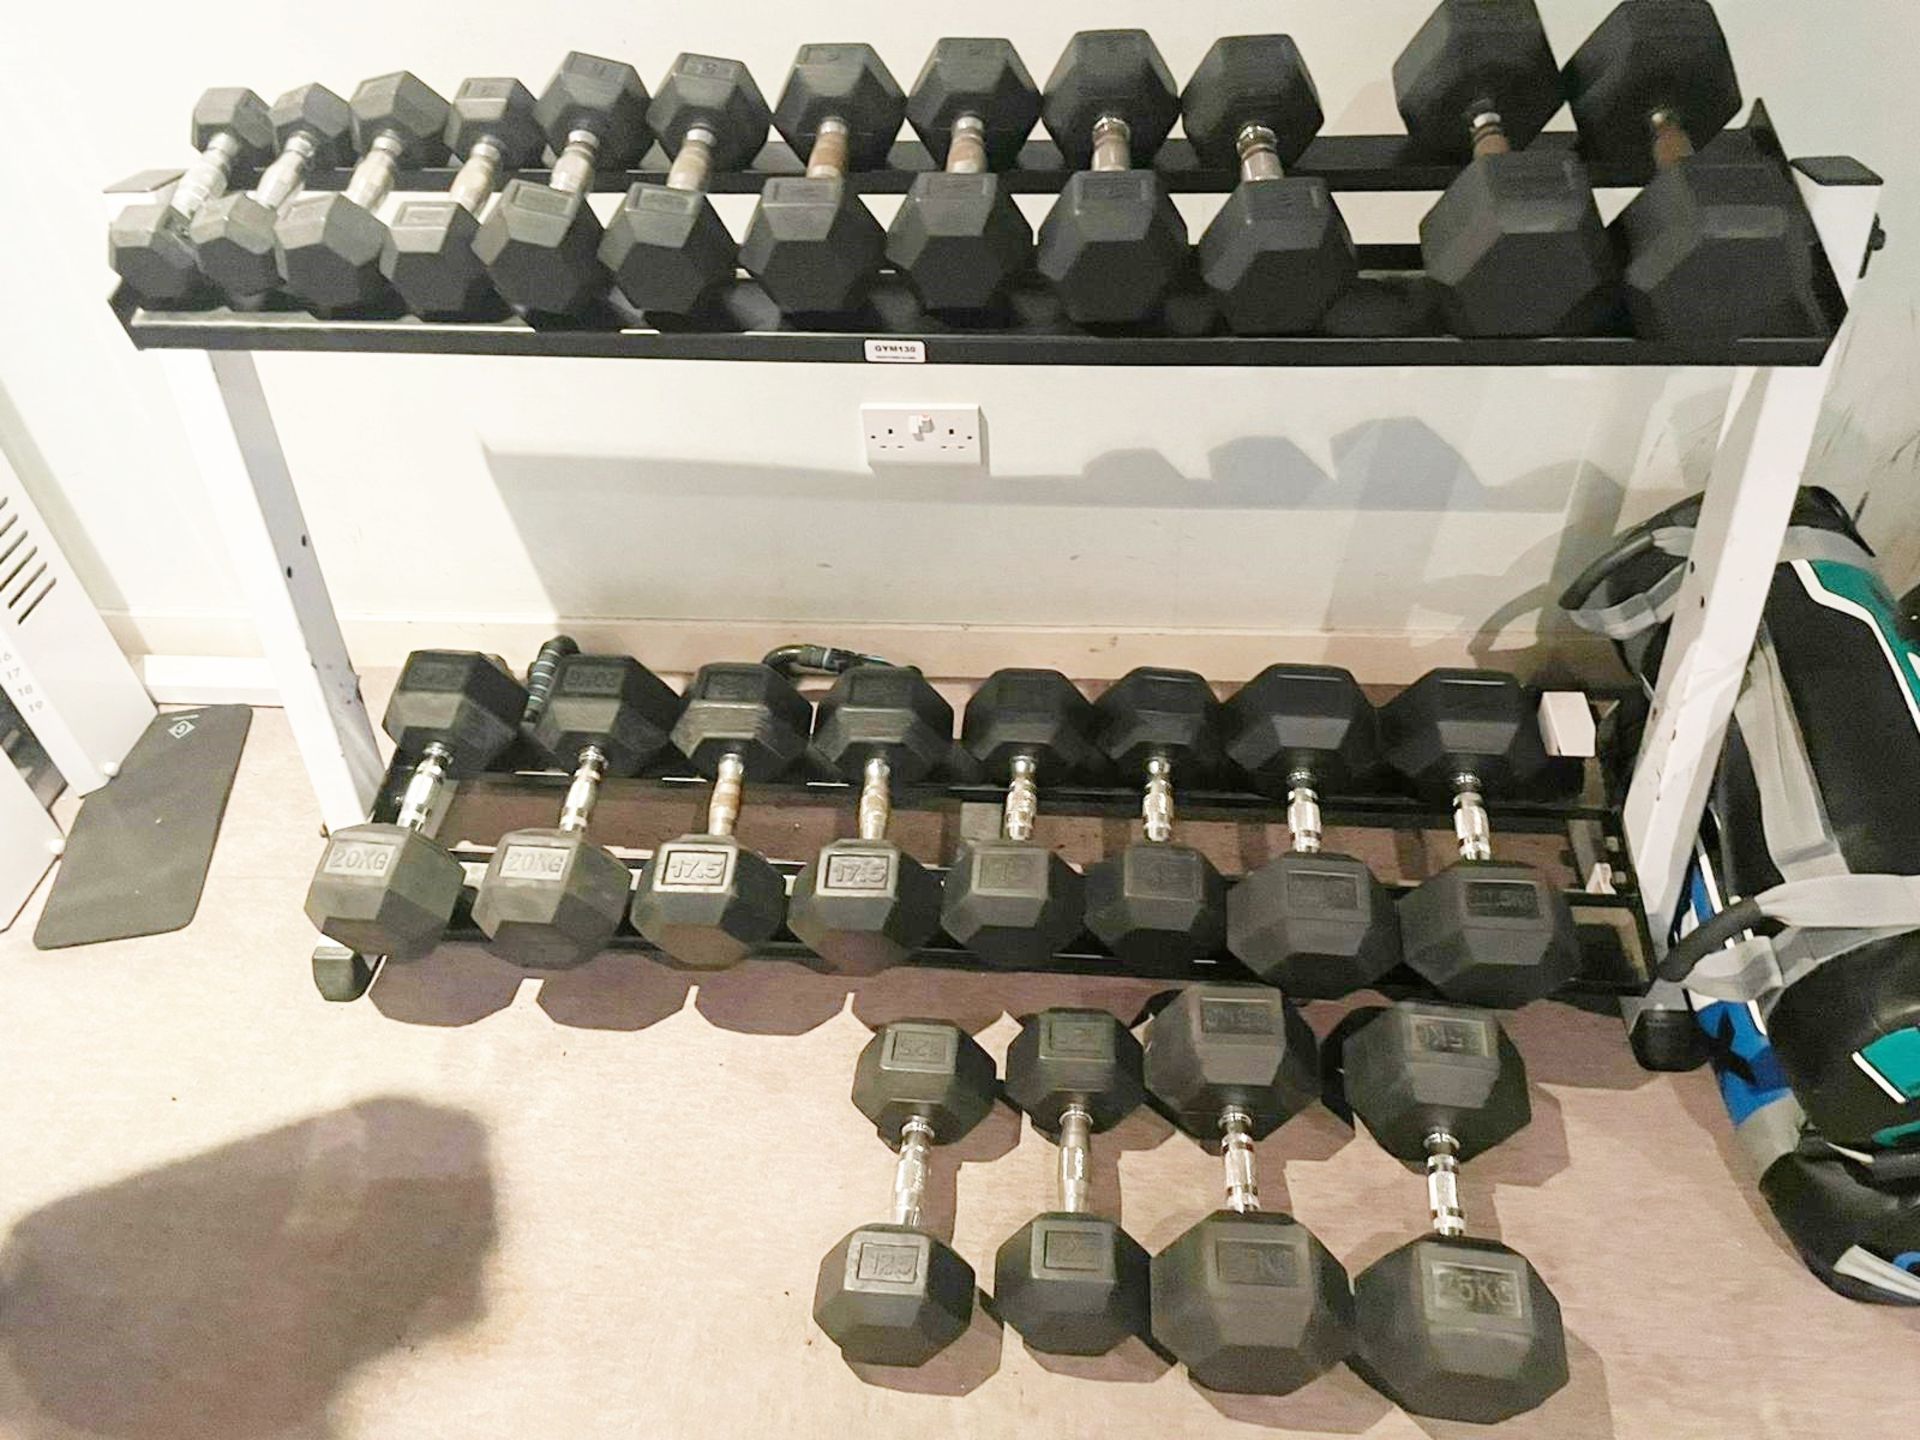 24 x Dumbbell Weight Set With Weight Rack - York and Pulse Brands Included - Commercial Fitness